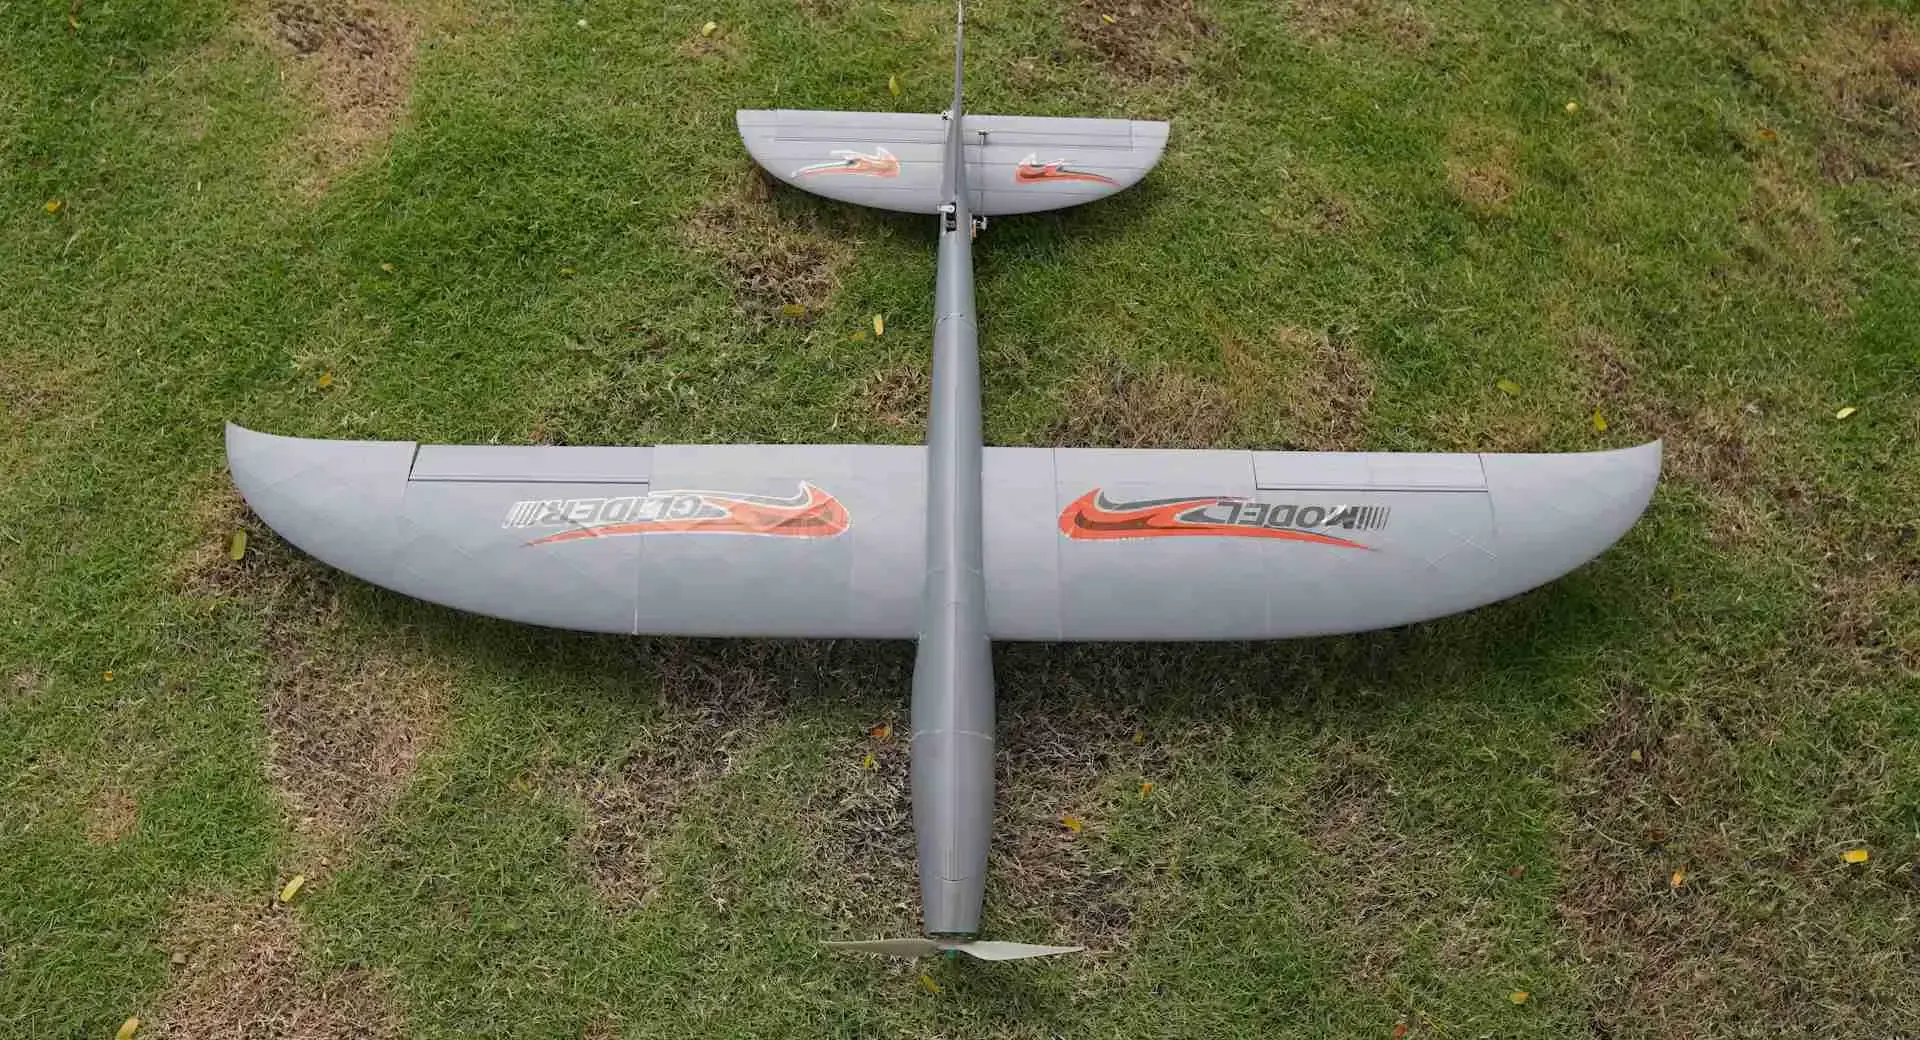 RC GLIDER 1200M WING SPAN